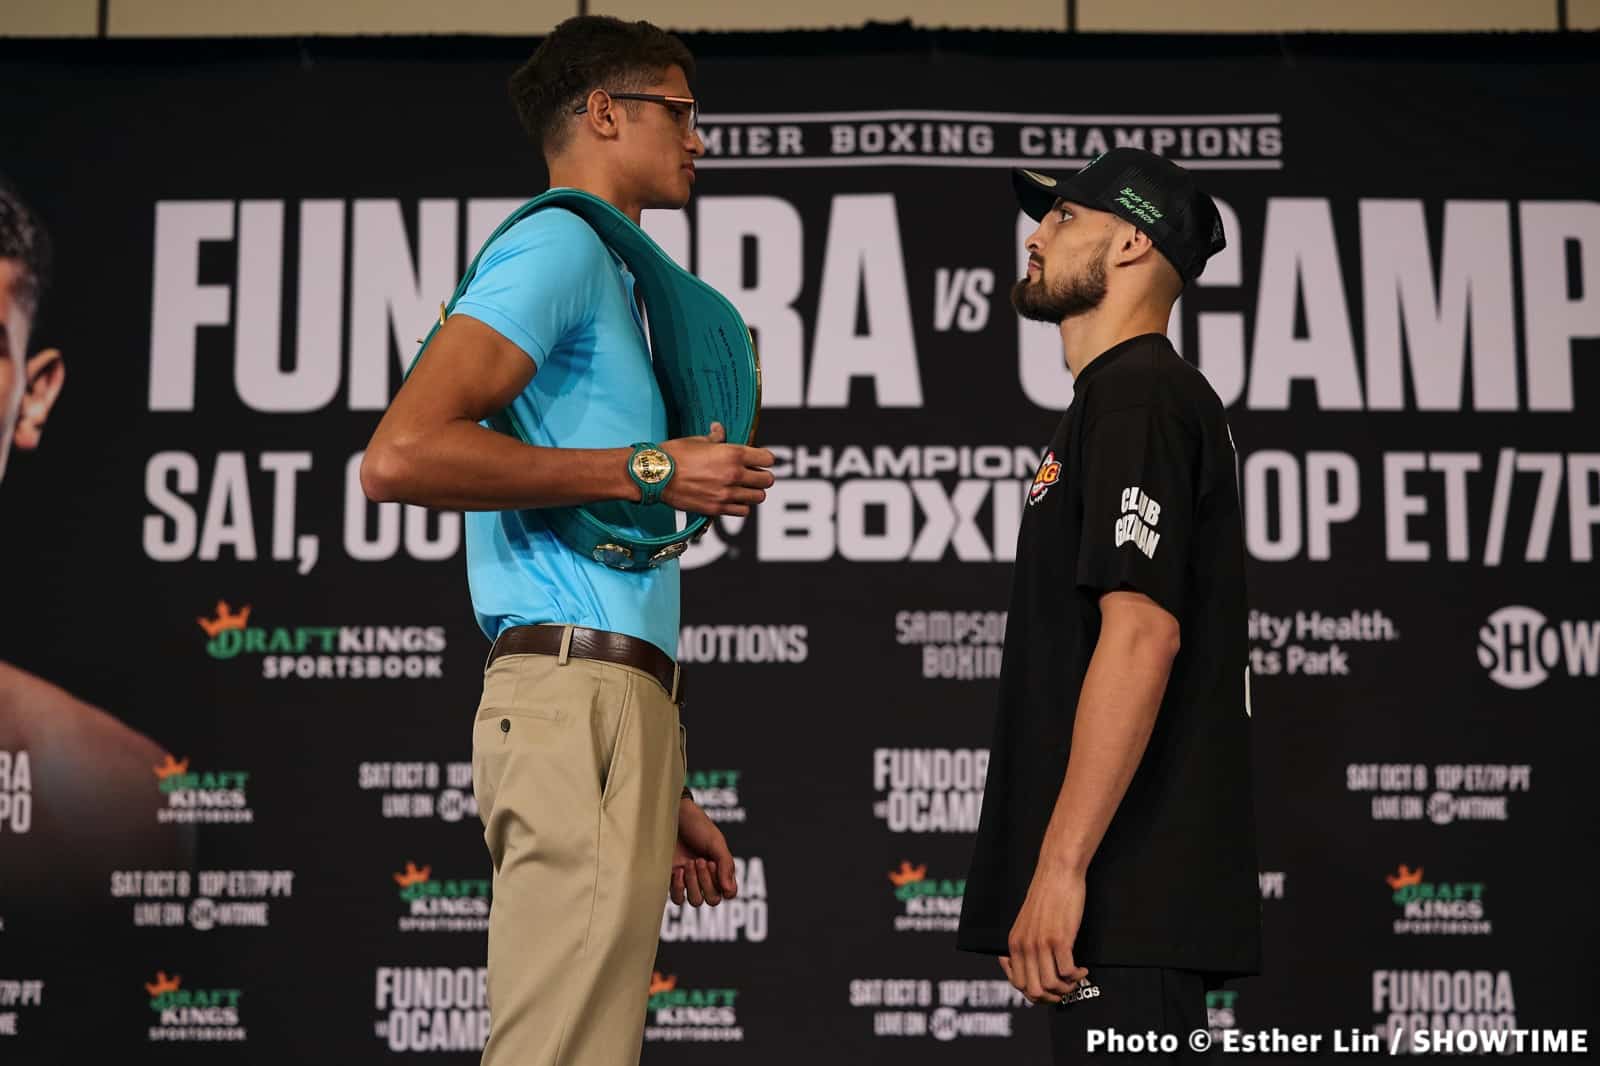 WATCH LIVE: Fundora - Ocampo Showtime Weigh In